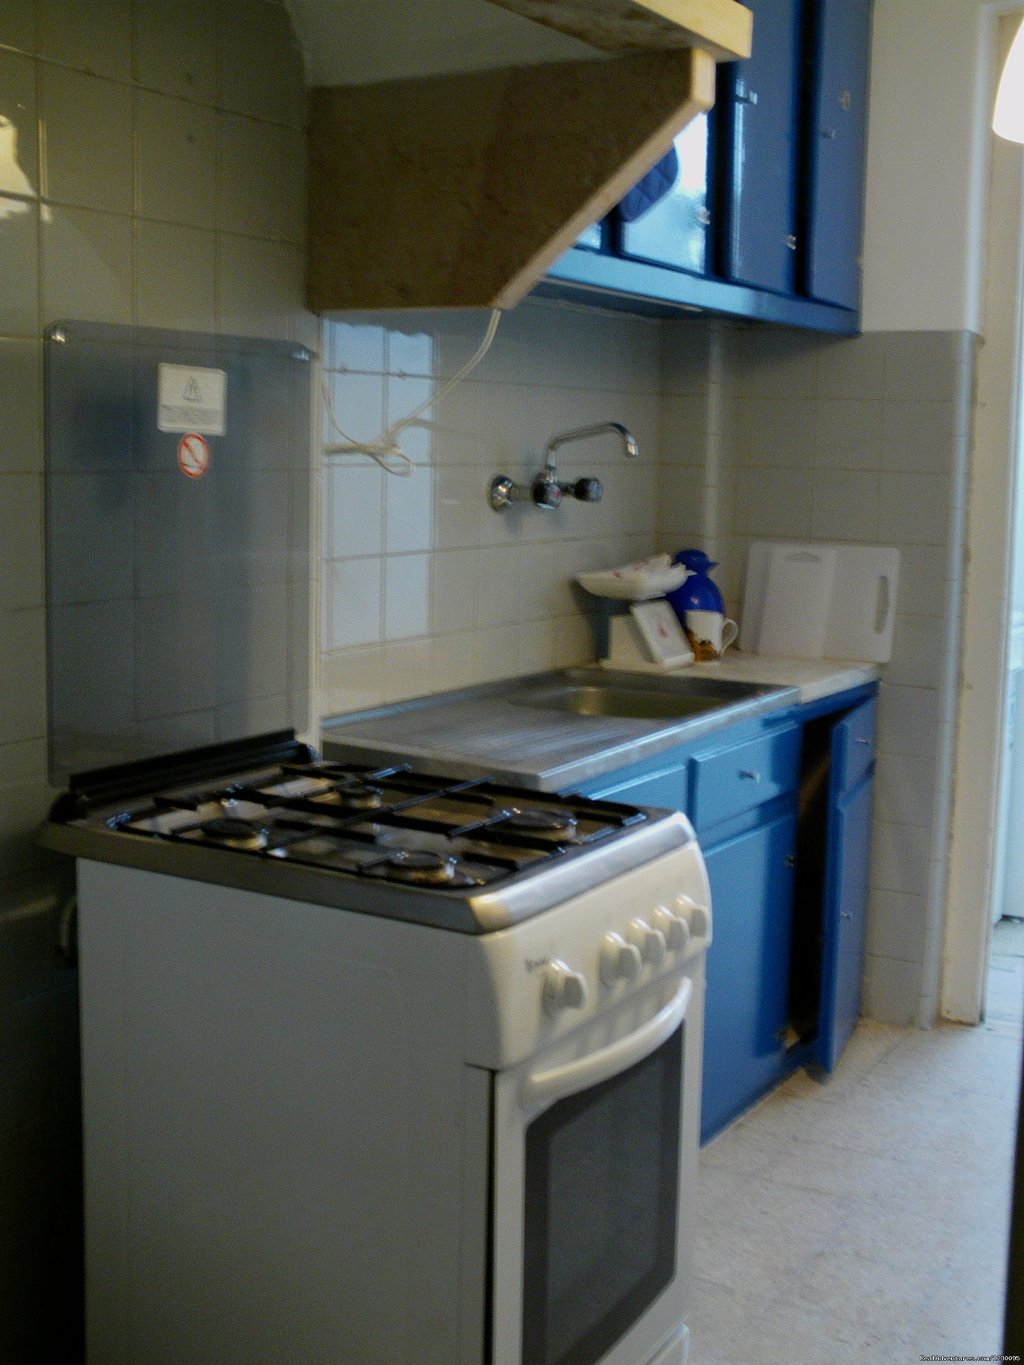 kitchen 1 - Arroios | Rent a Room in Central Lisbon | Lisbon, Portugal | Vacation Rentals | Image #1/16 | 